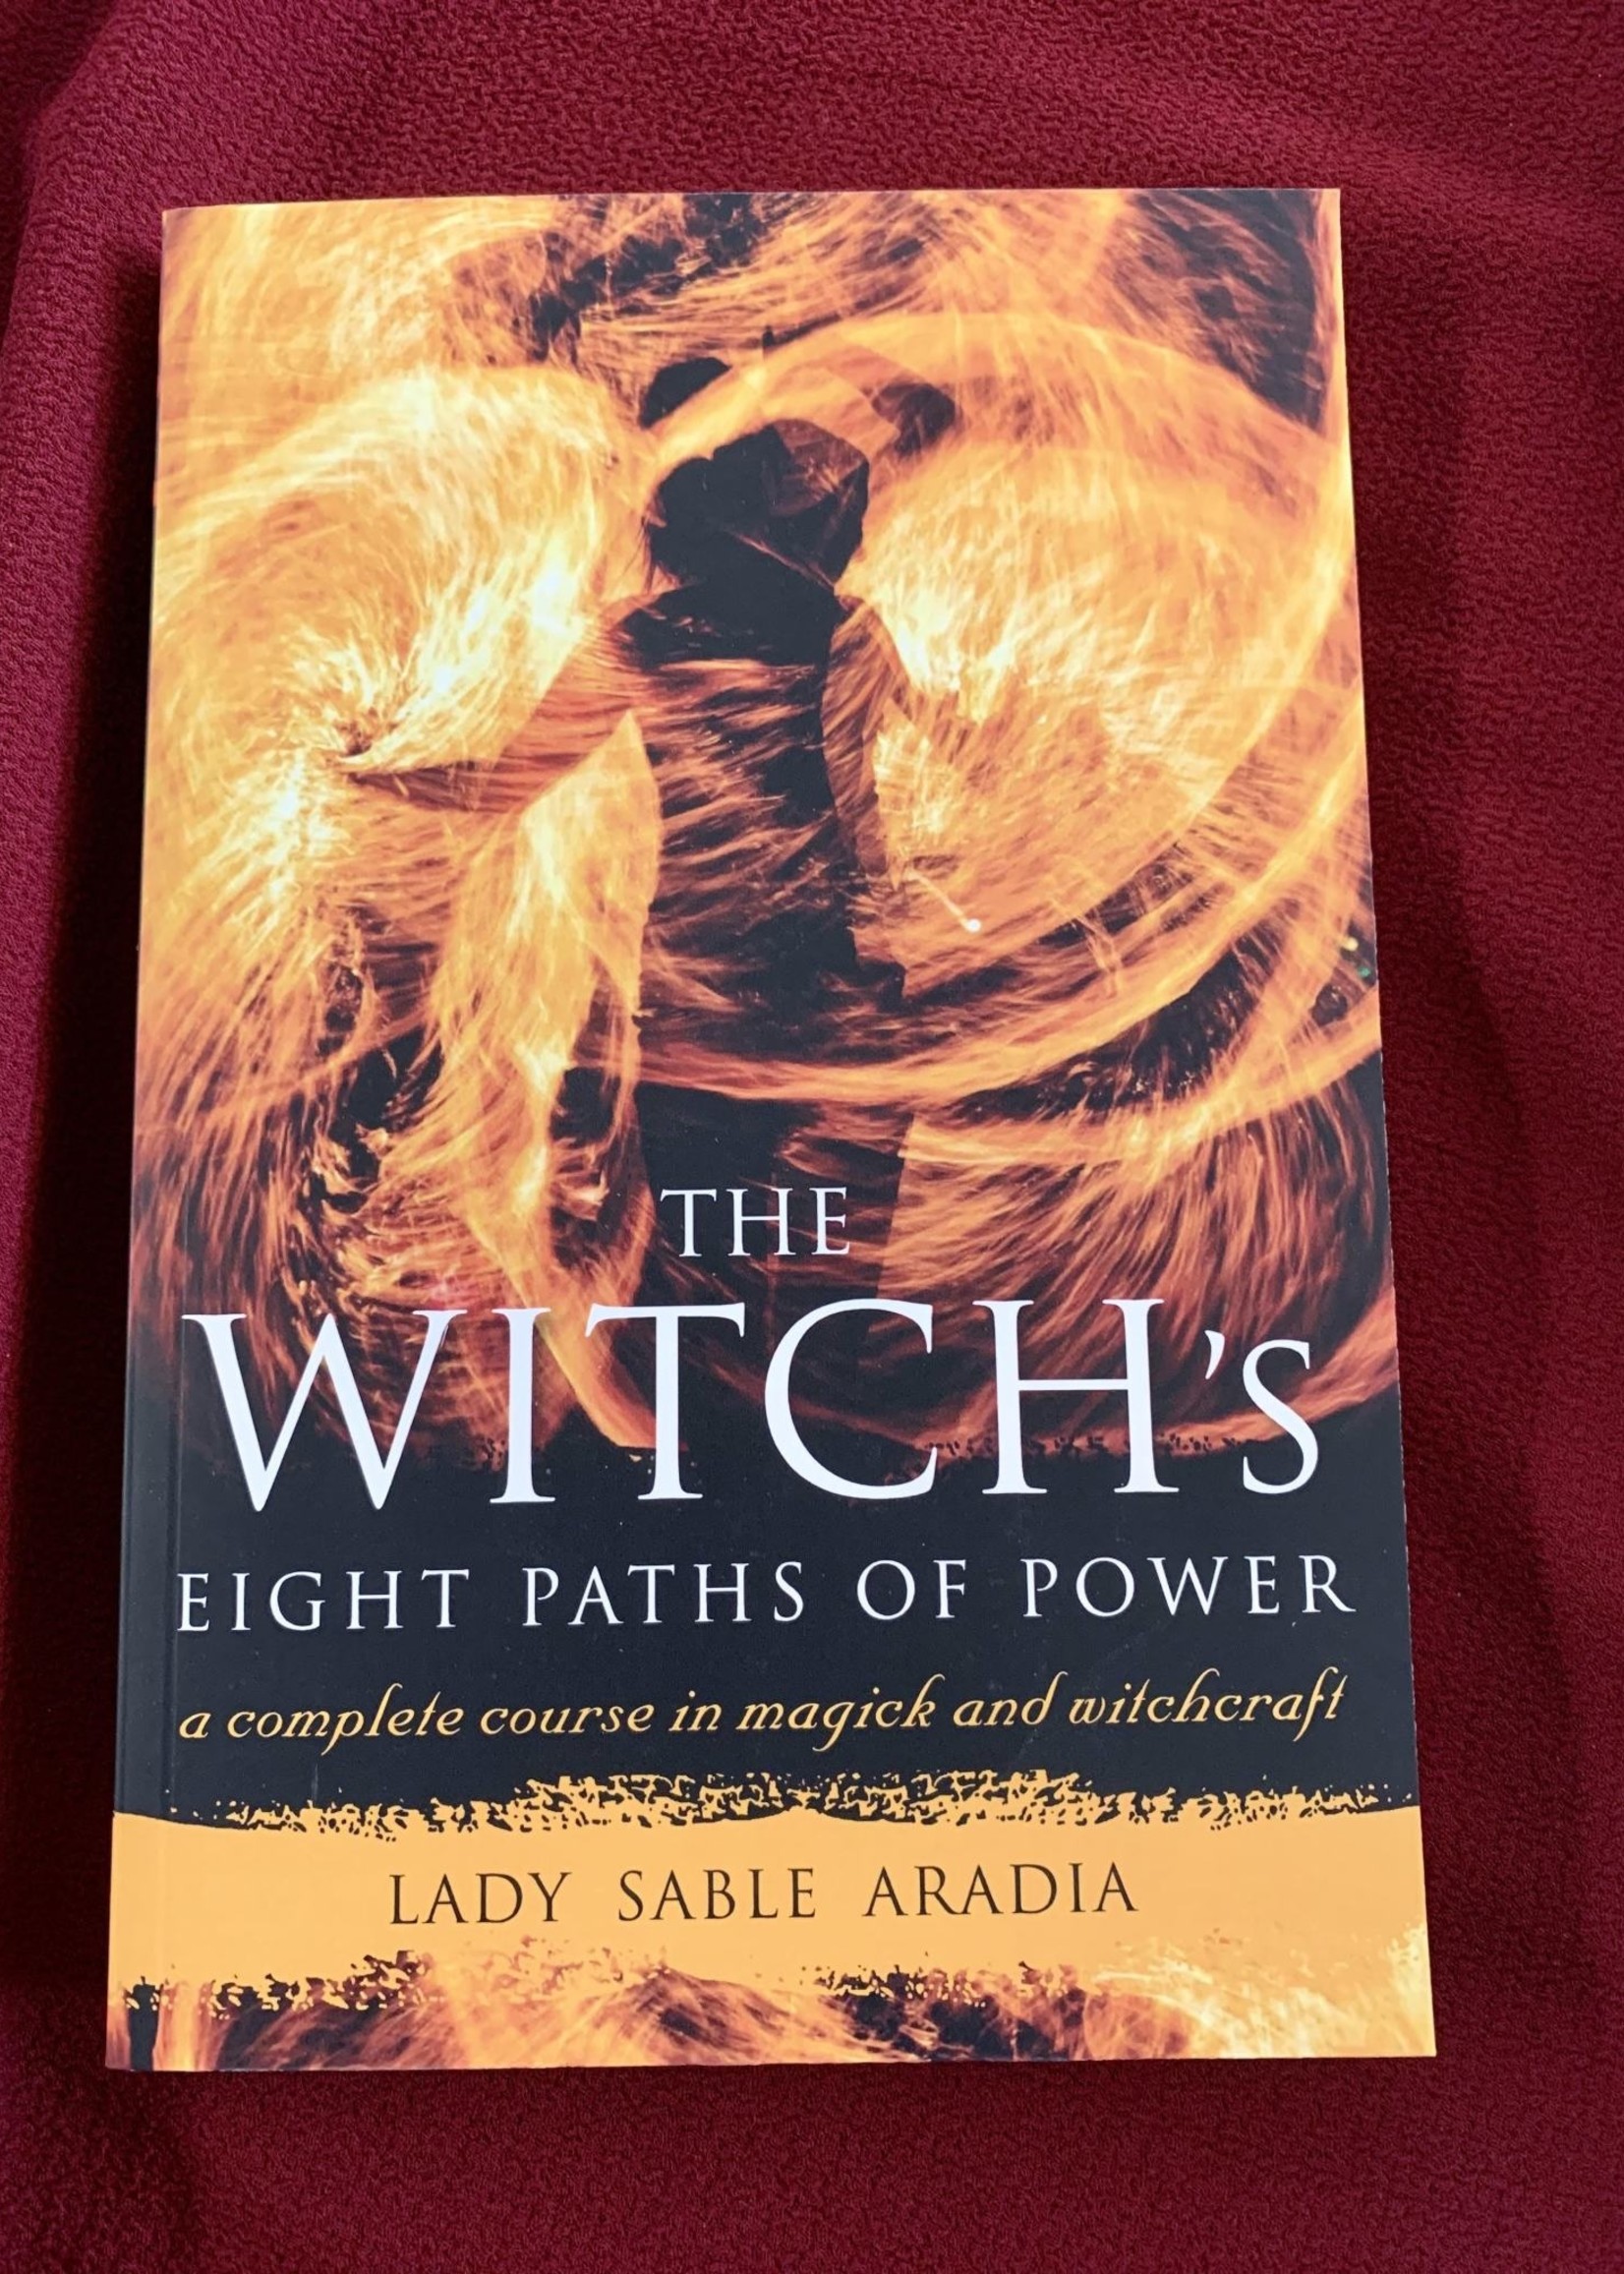 The Witch's Eight Paths of Power A Complete Course in Magick and Witchcraft - Lady Sable Aradia